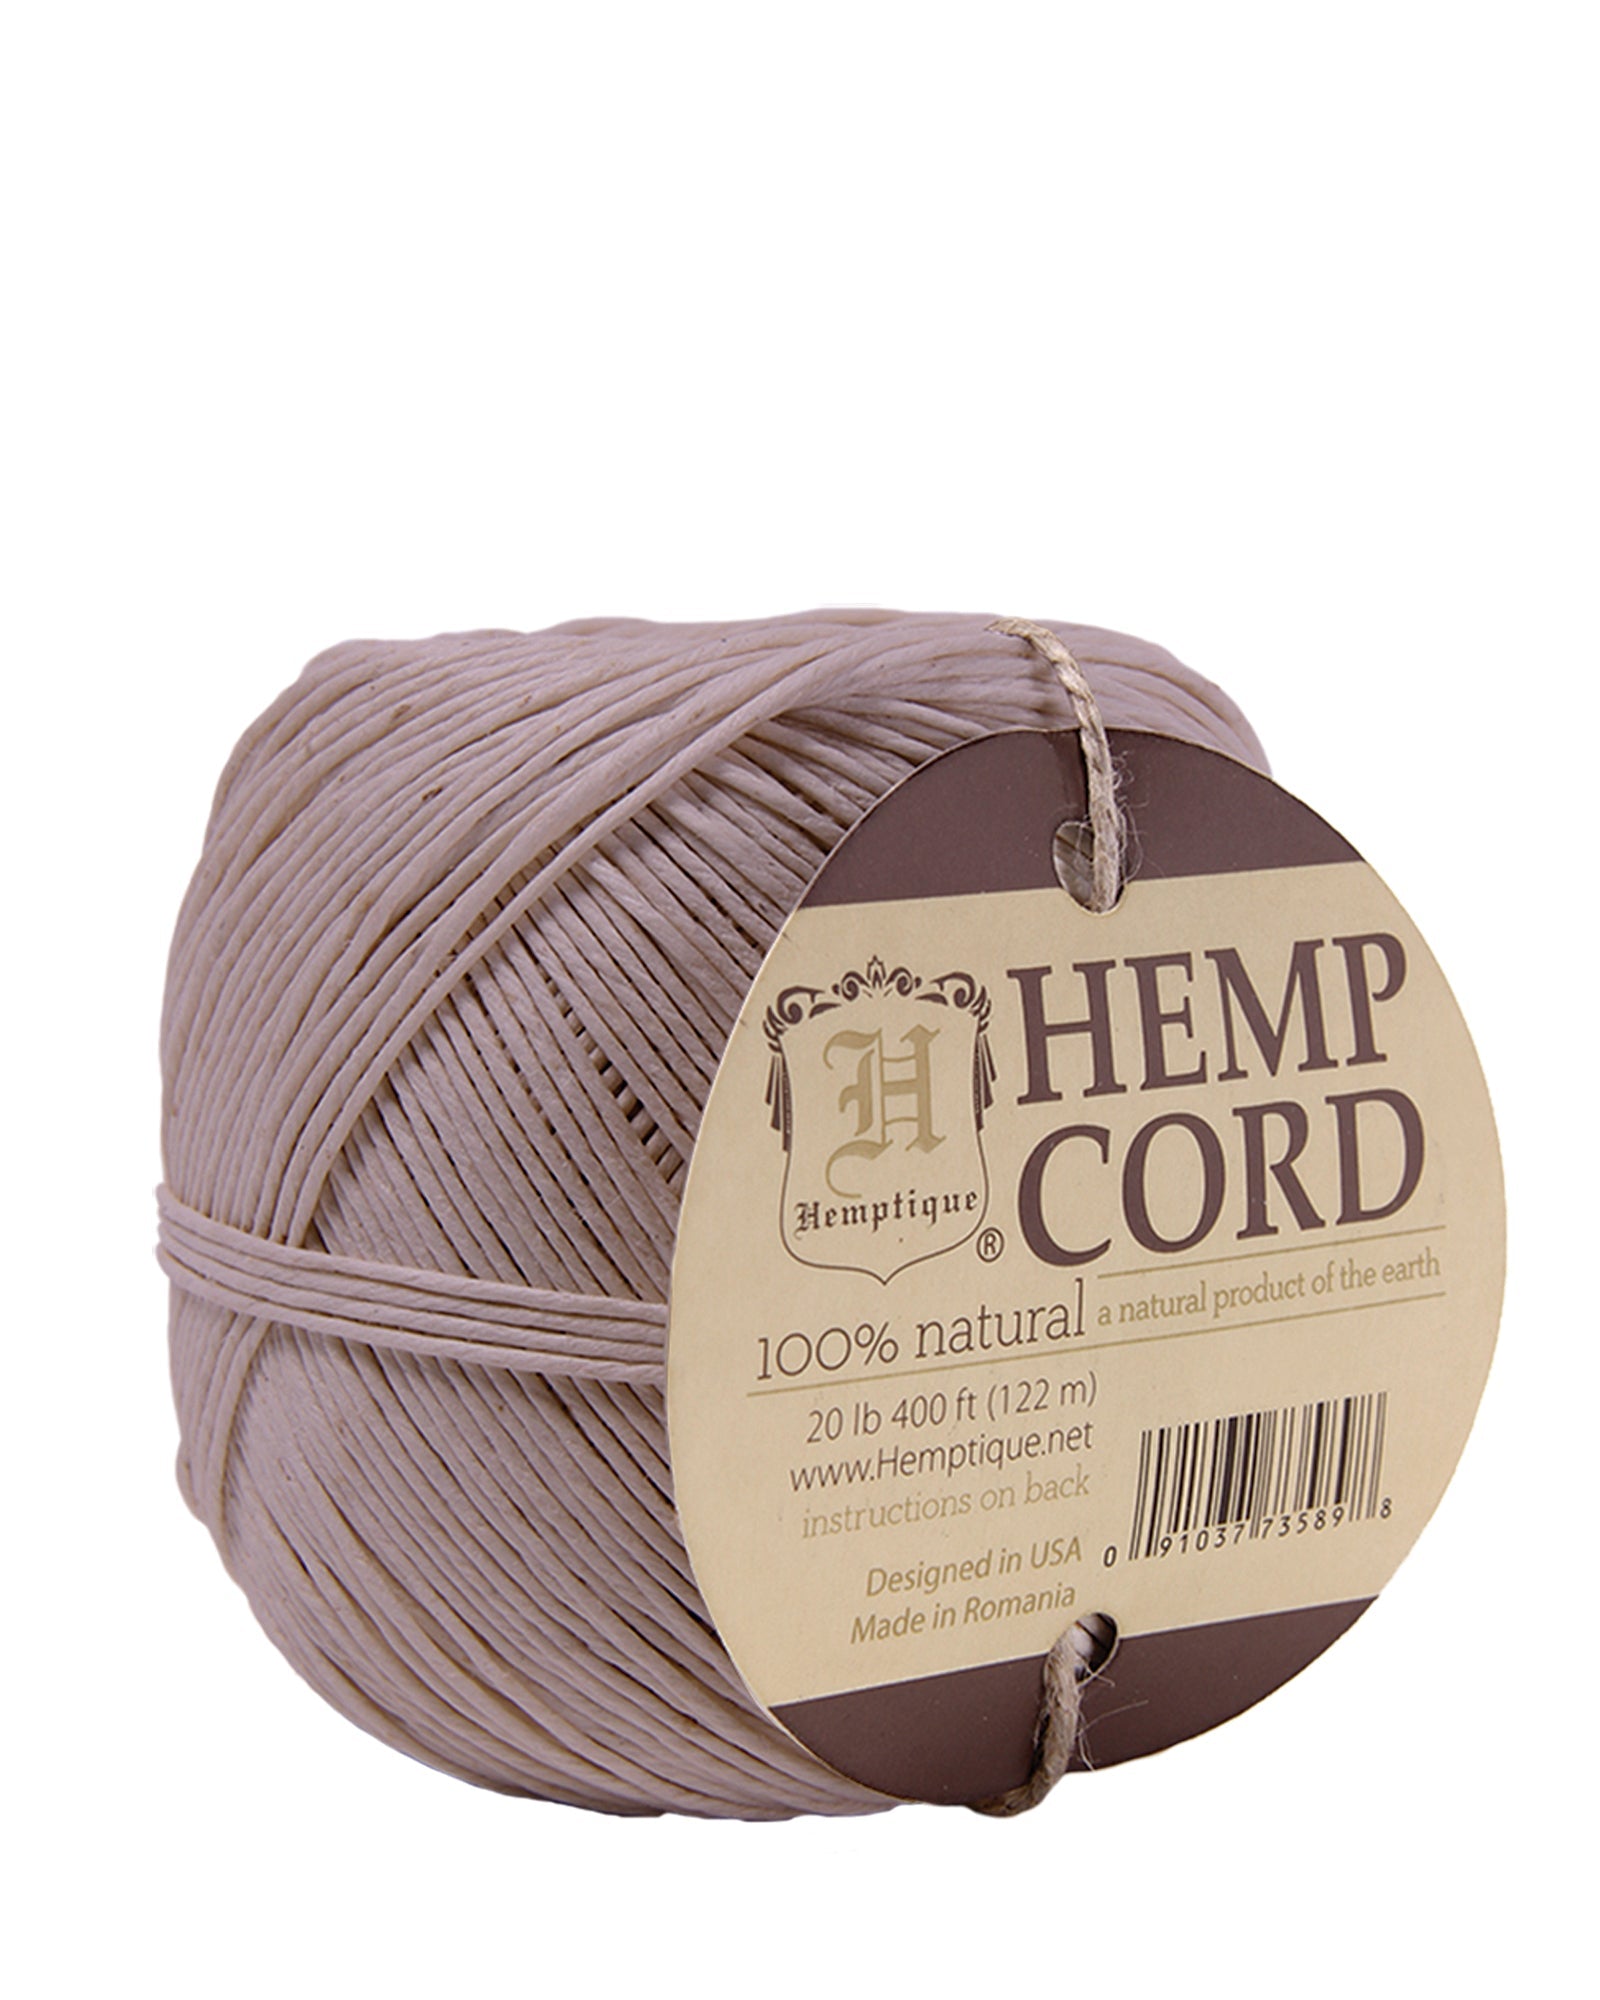  One Package of 400 feet 100% Natural Hemp Cord #20